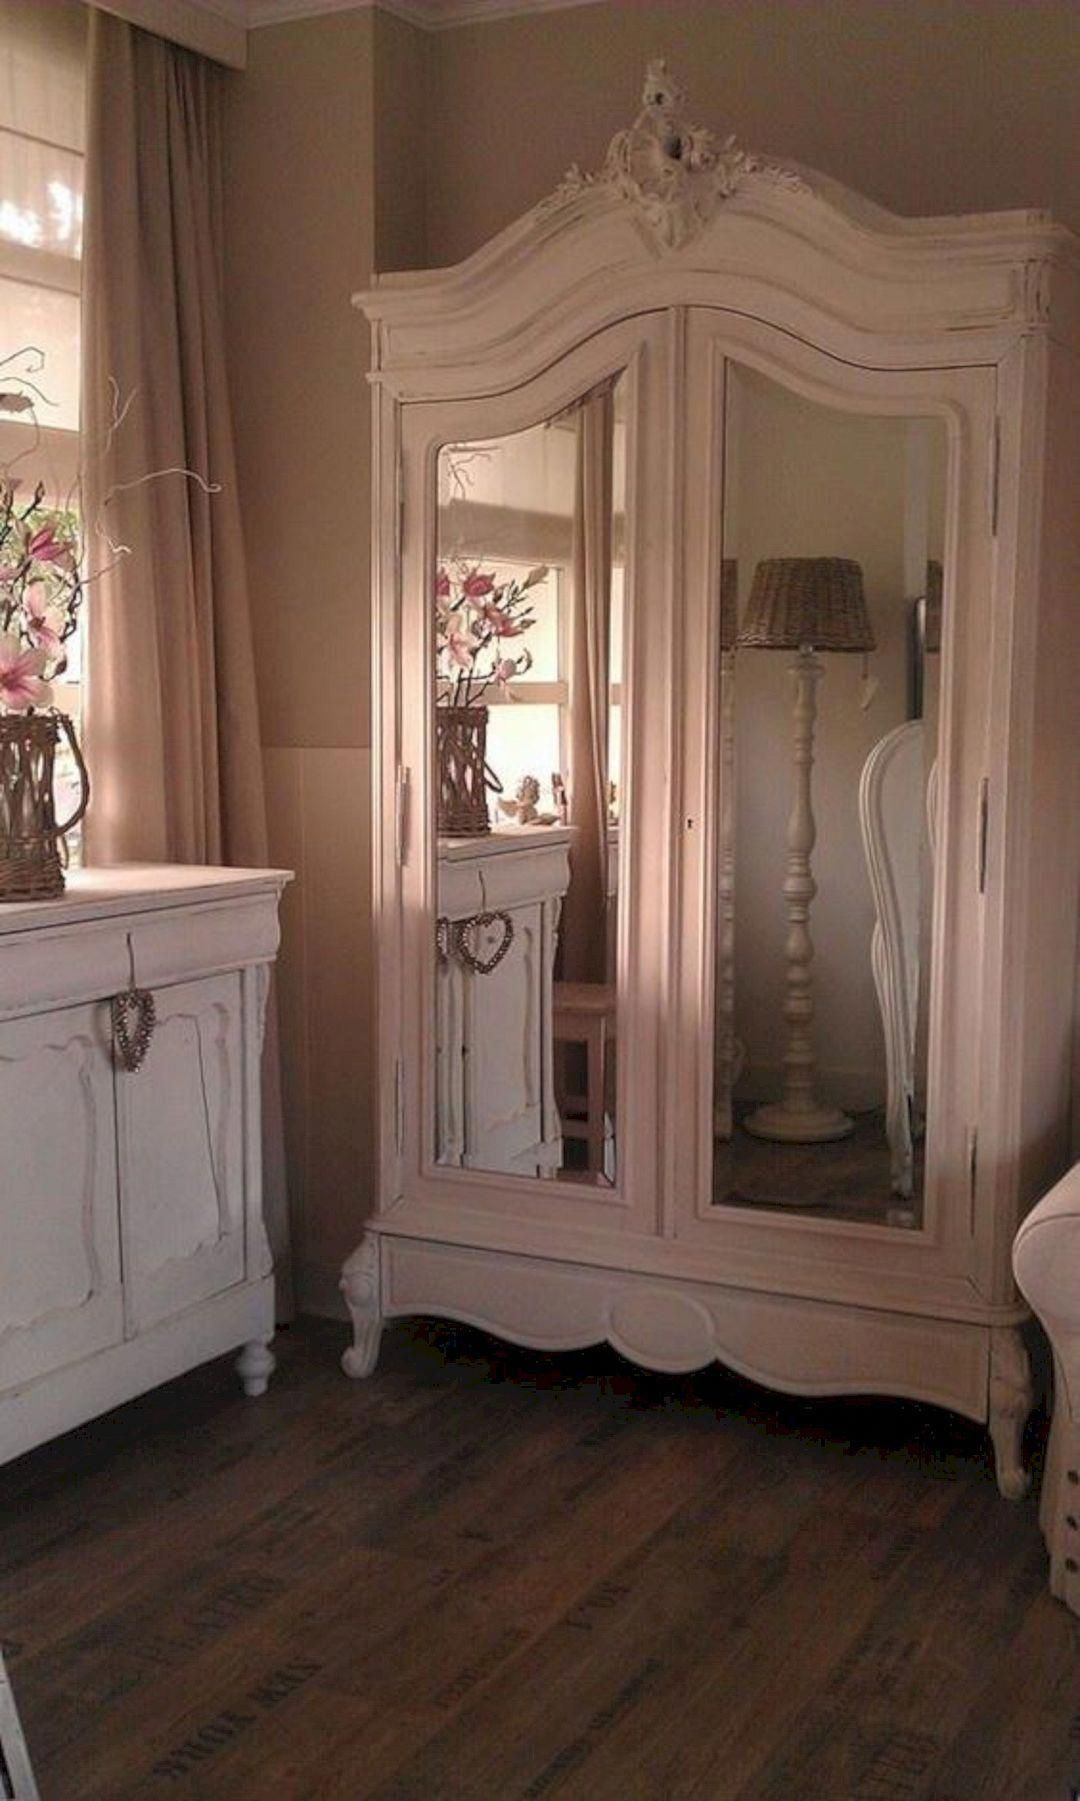 Cheap Shabby Chic Bedroom Furniture
 Romantic rustic shabby chic home Hurry cheap this week